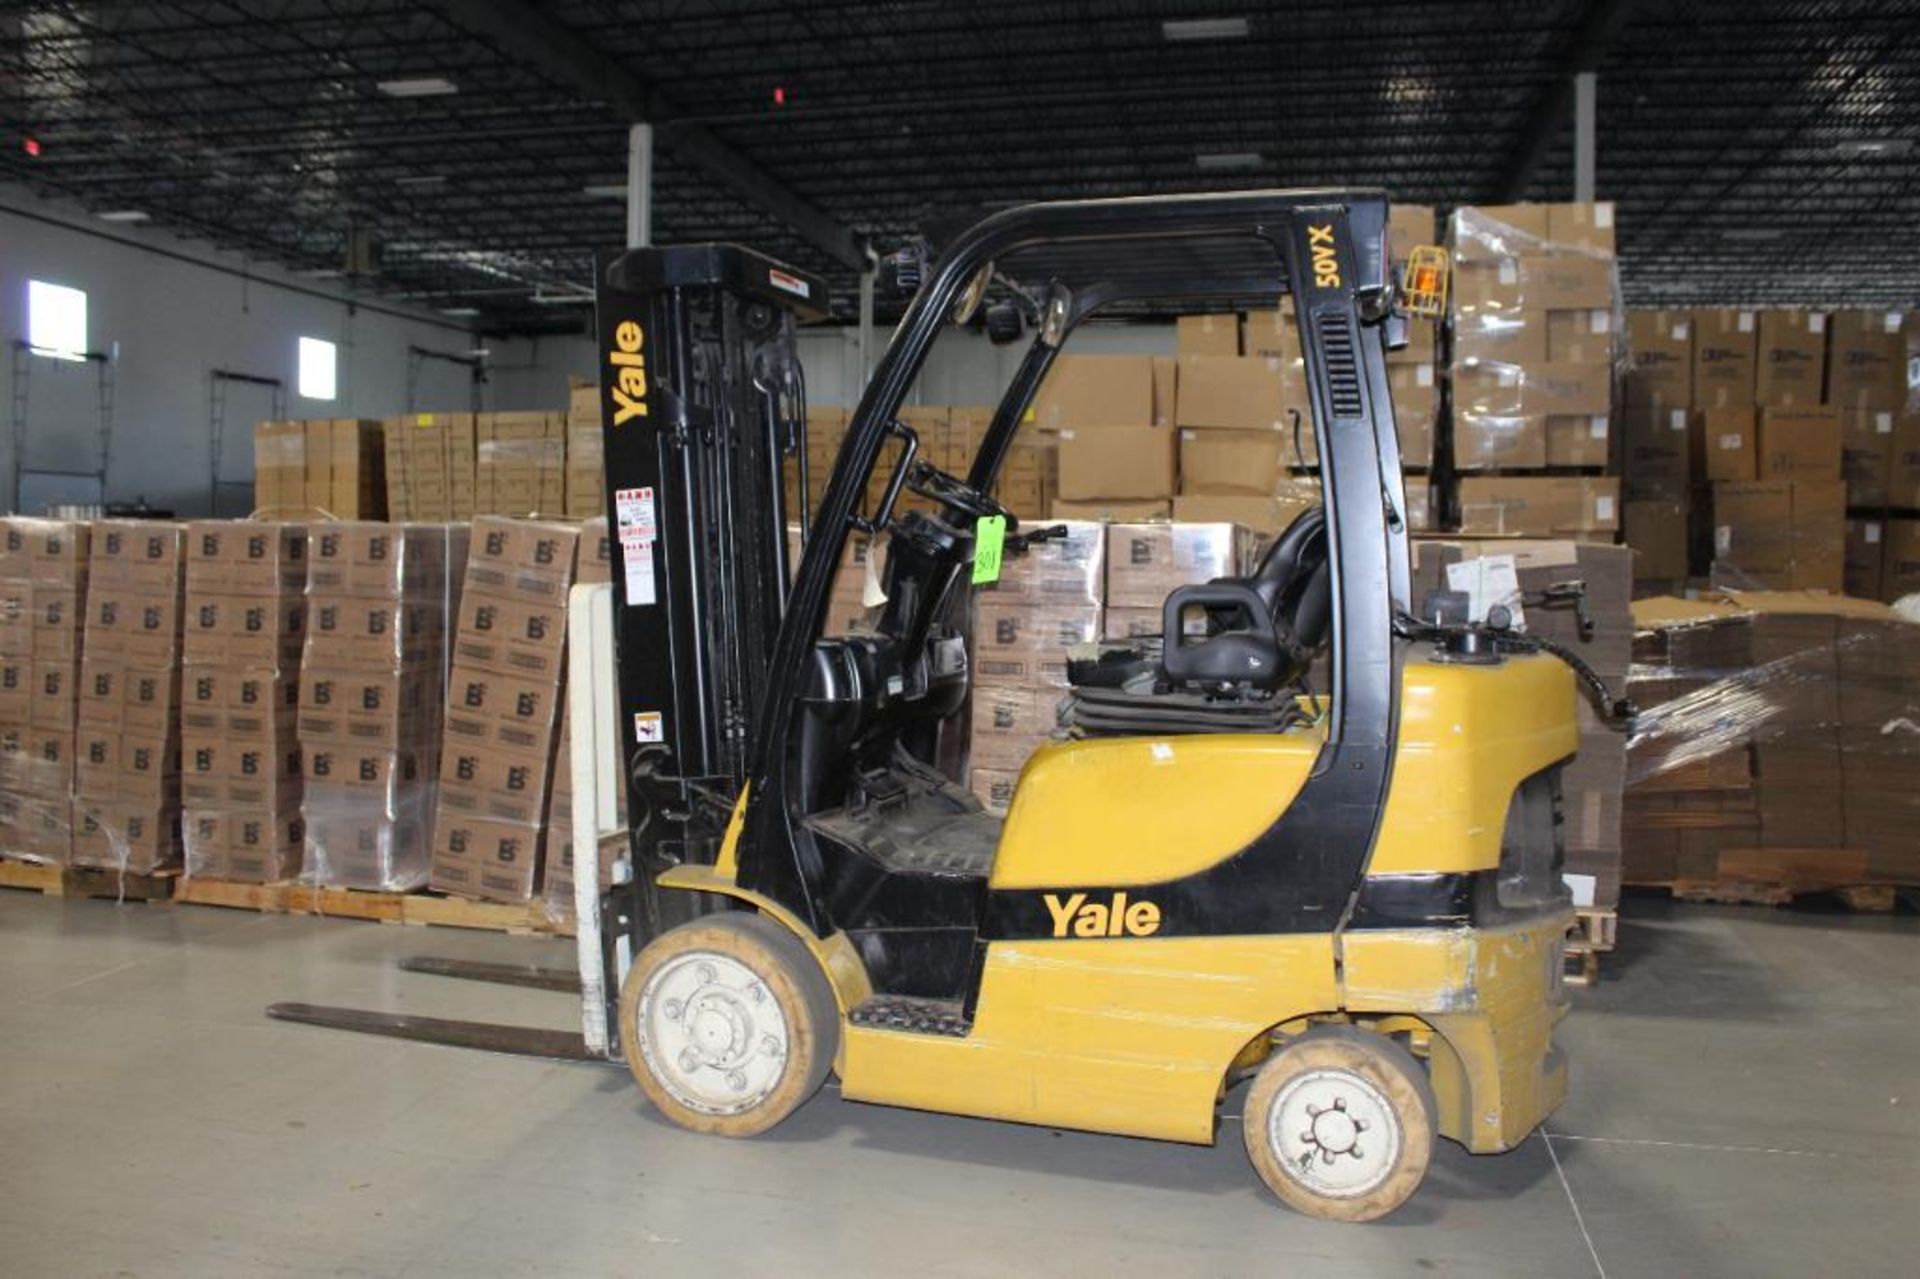 Yale 4800LB Capacity Lift Truck - Delayed Removal